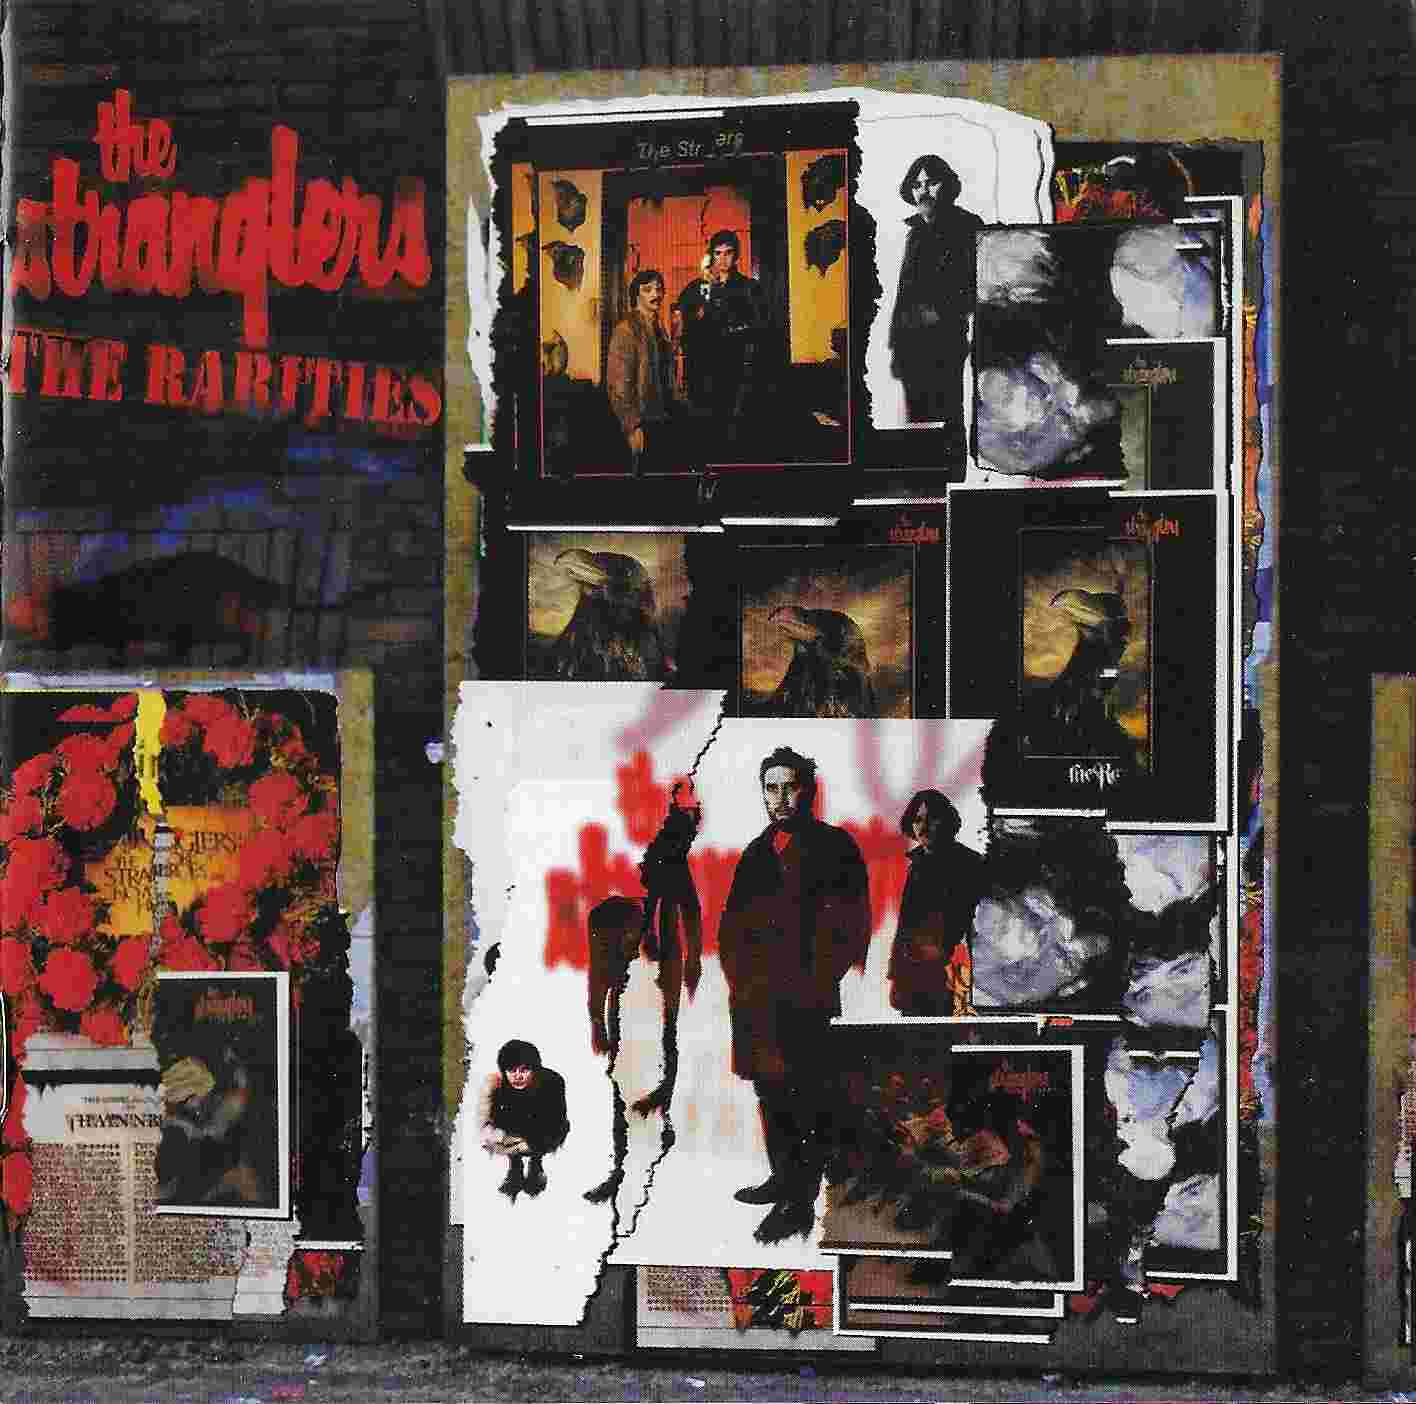 Picture of 541 0792 The rarities by artist The Stranglers